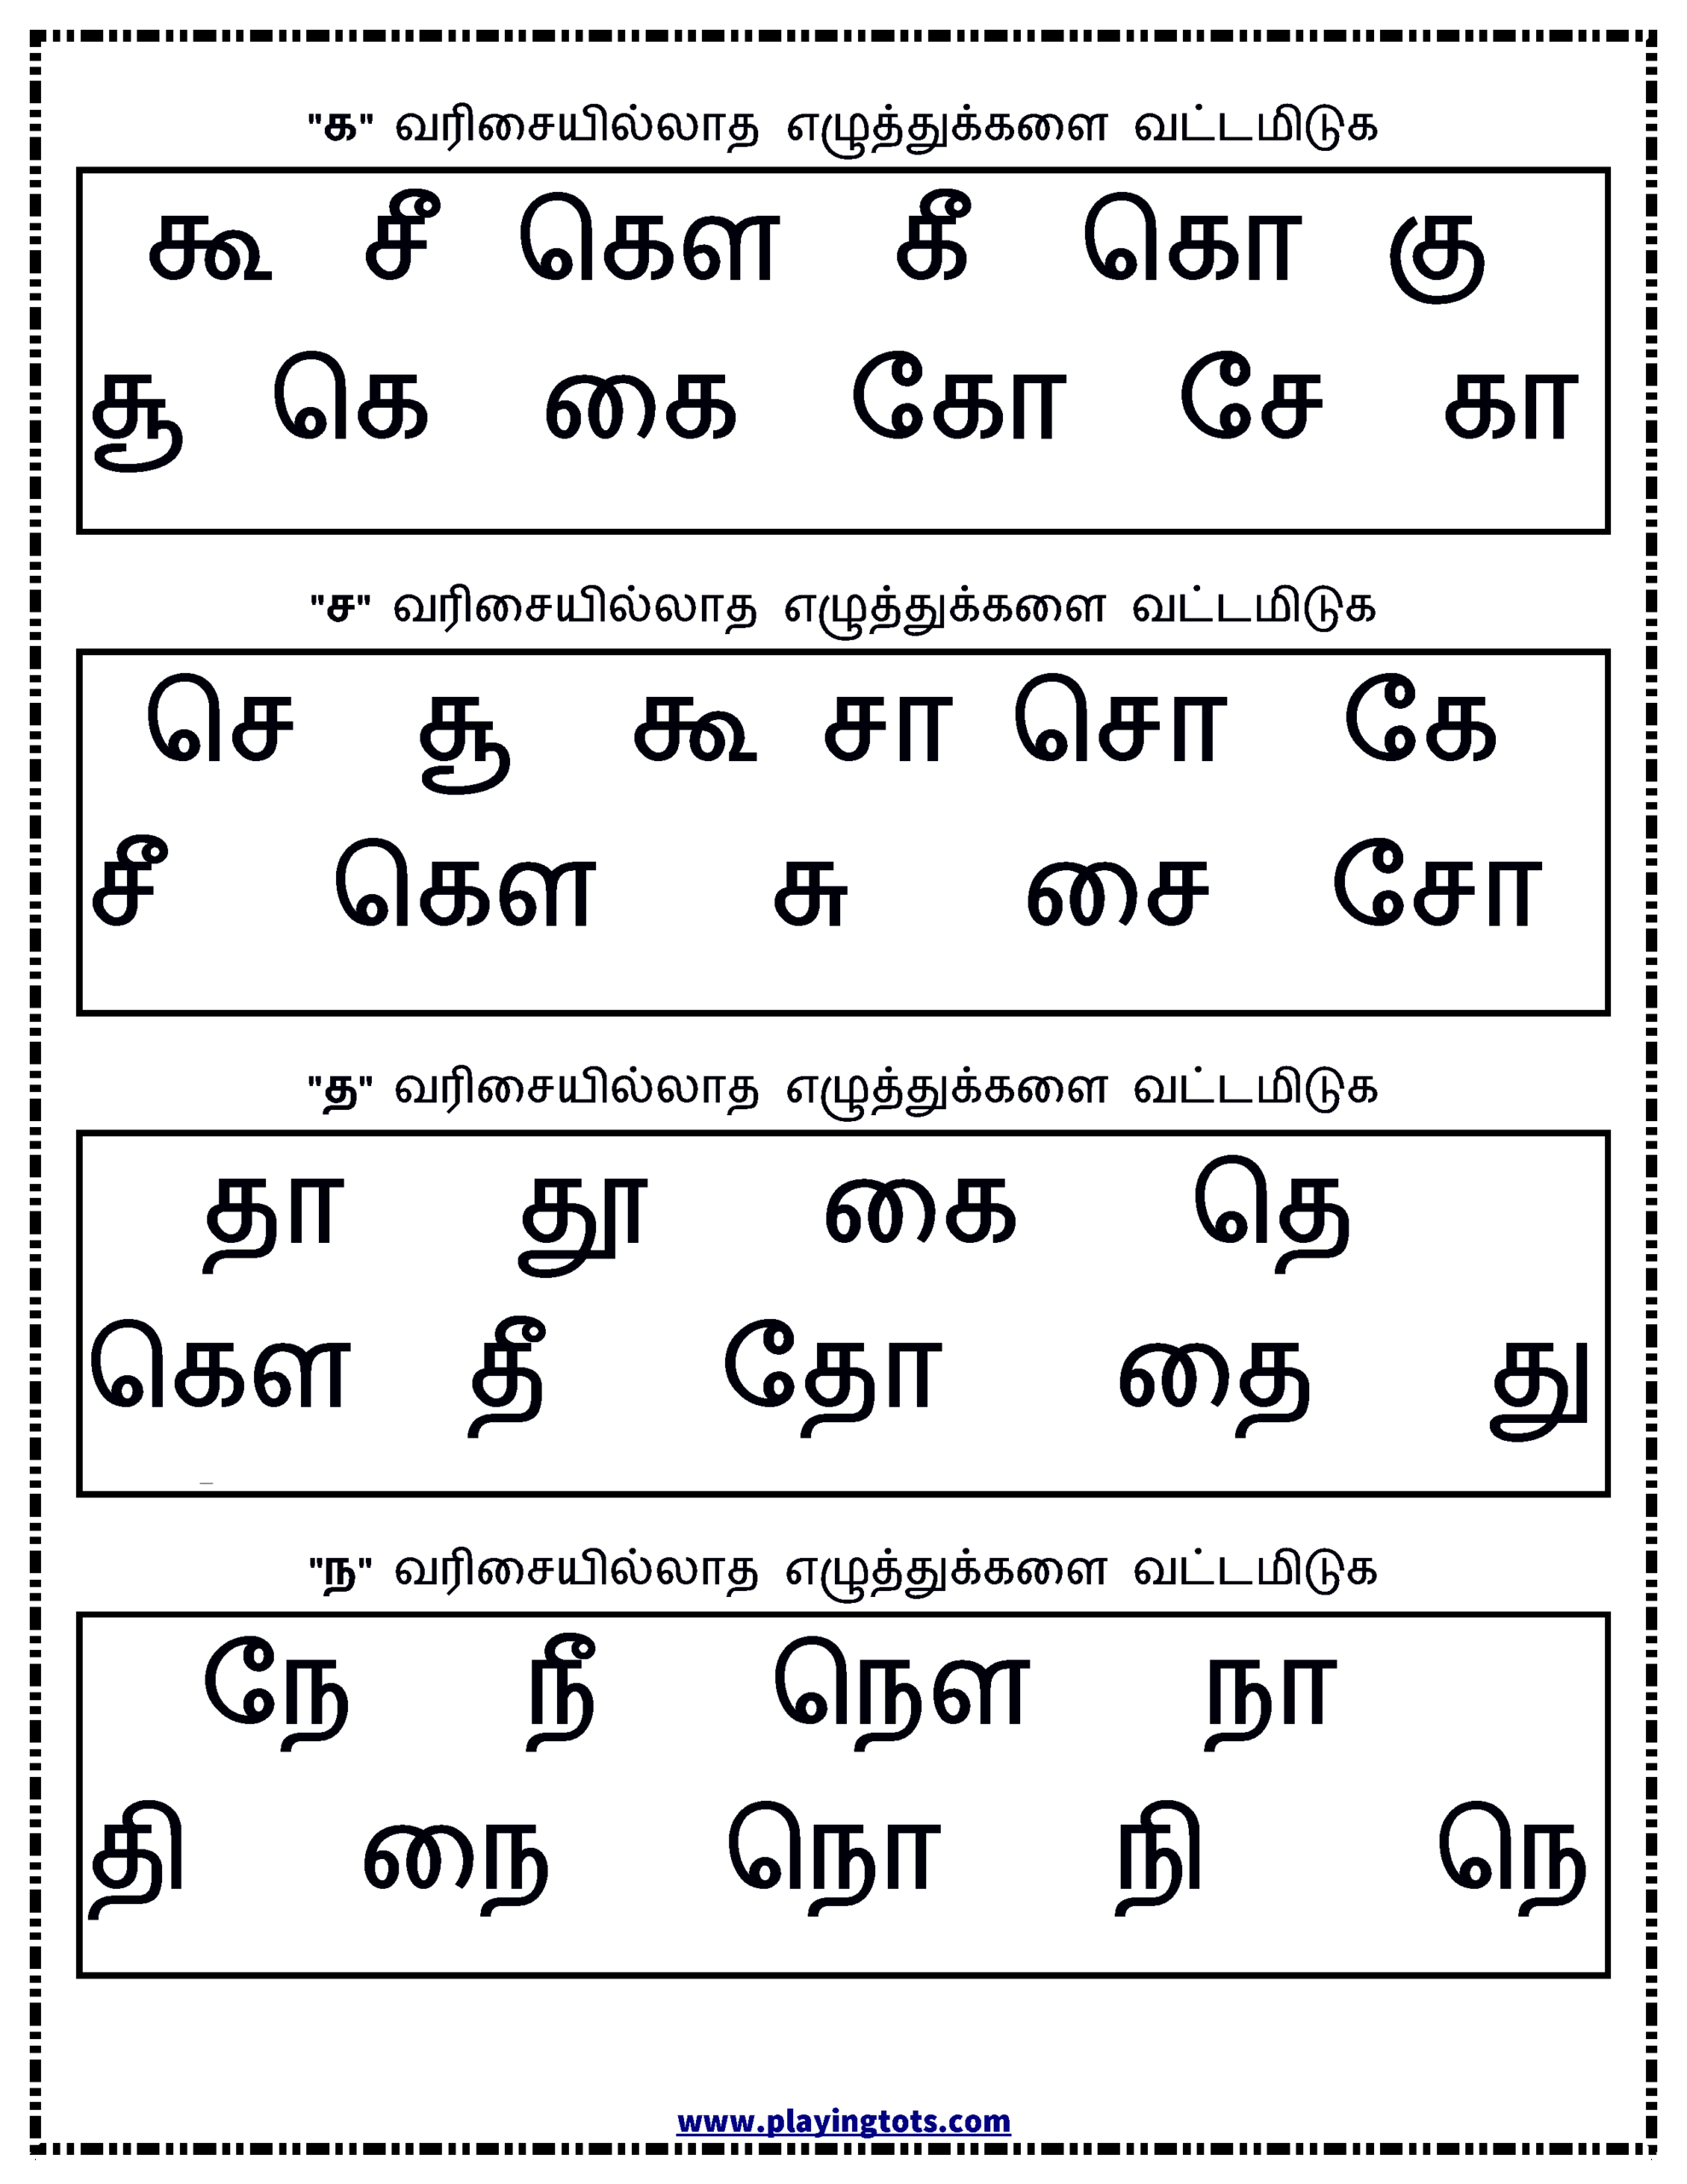 Worksheets - Tamil Letters - Odd One Out regarding Tamil Letters Tracing Worksheets Pdf